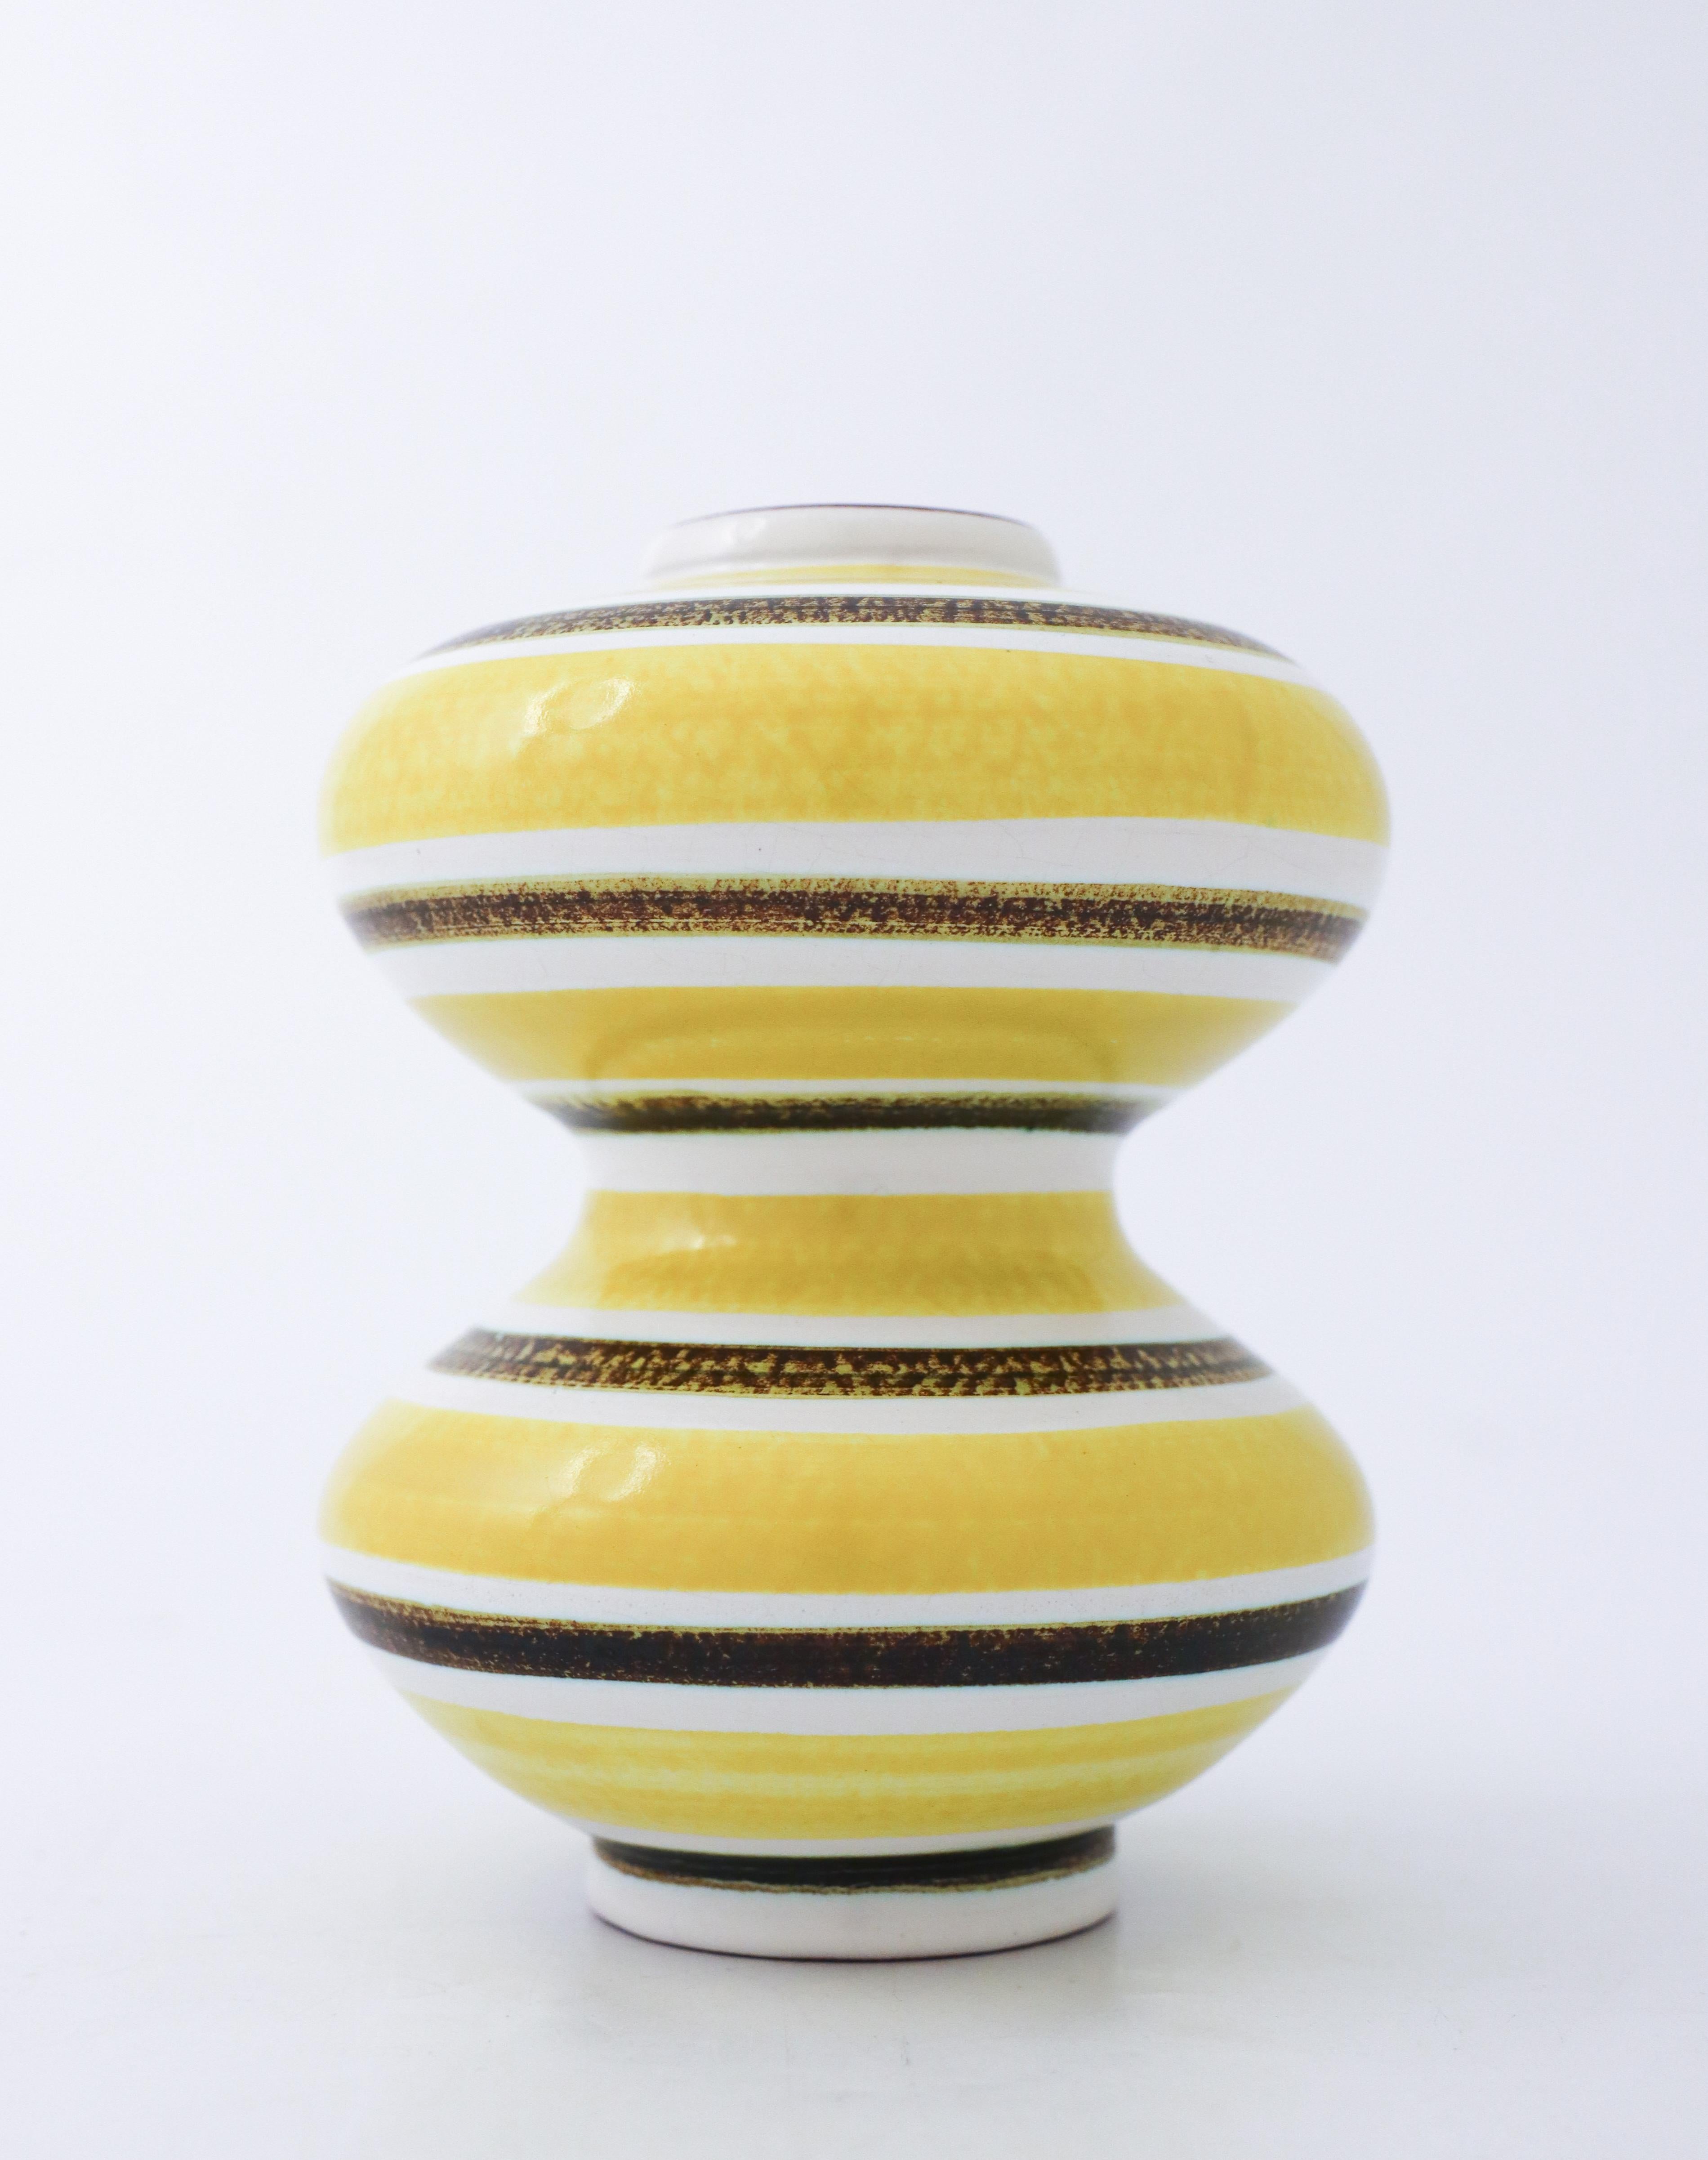 A vase in faience designed by Stig Lindberg at Gustavsbergs Studio in Stockholm, it is 13.5 cm (5.4